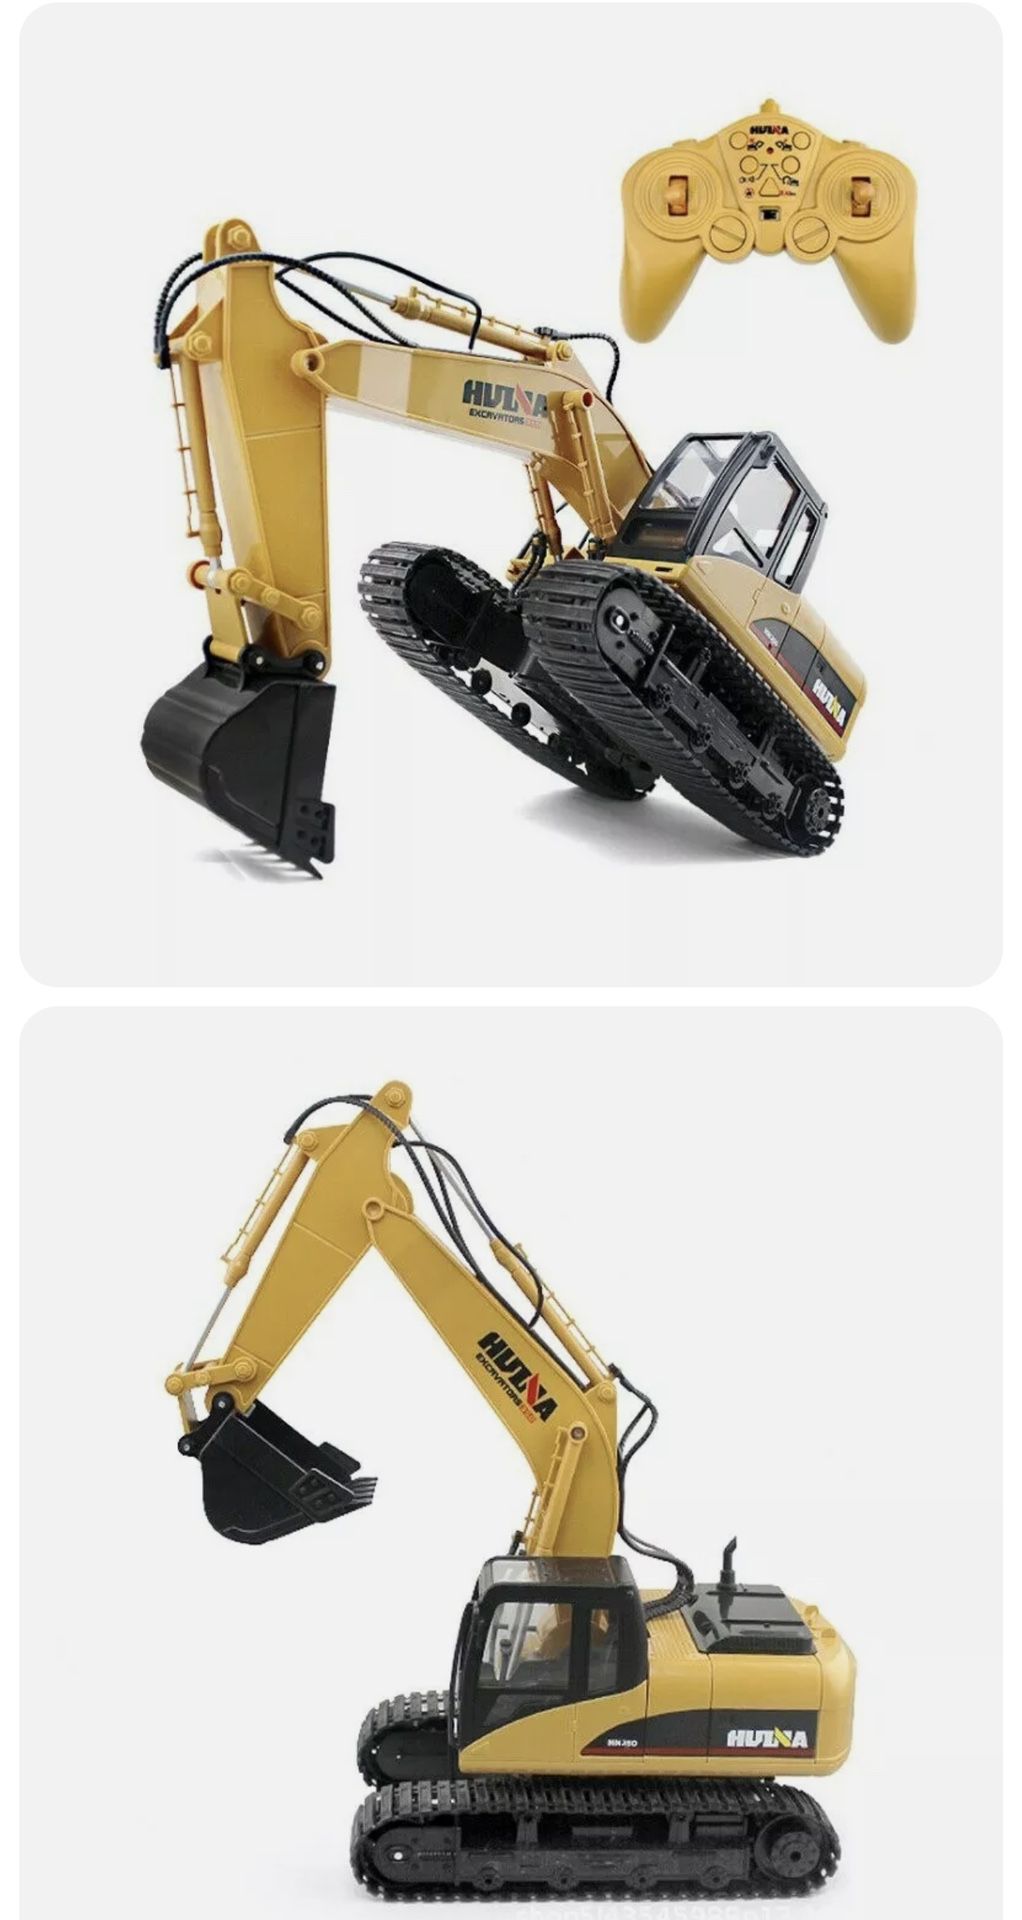 Excavator For Sale New In Sealed Box Isn’t Metal Is A Plastic But Good And Quality 